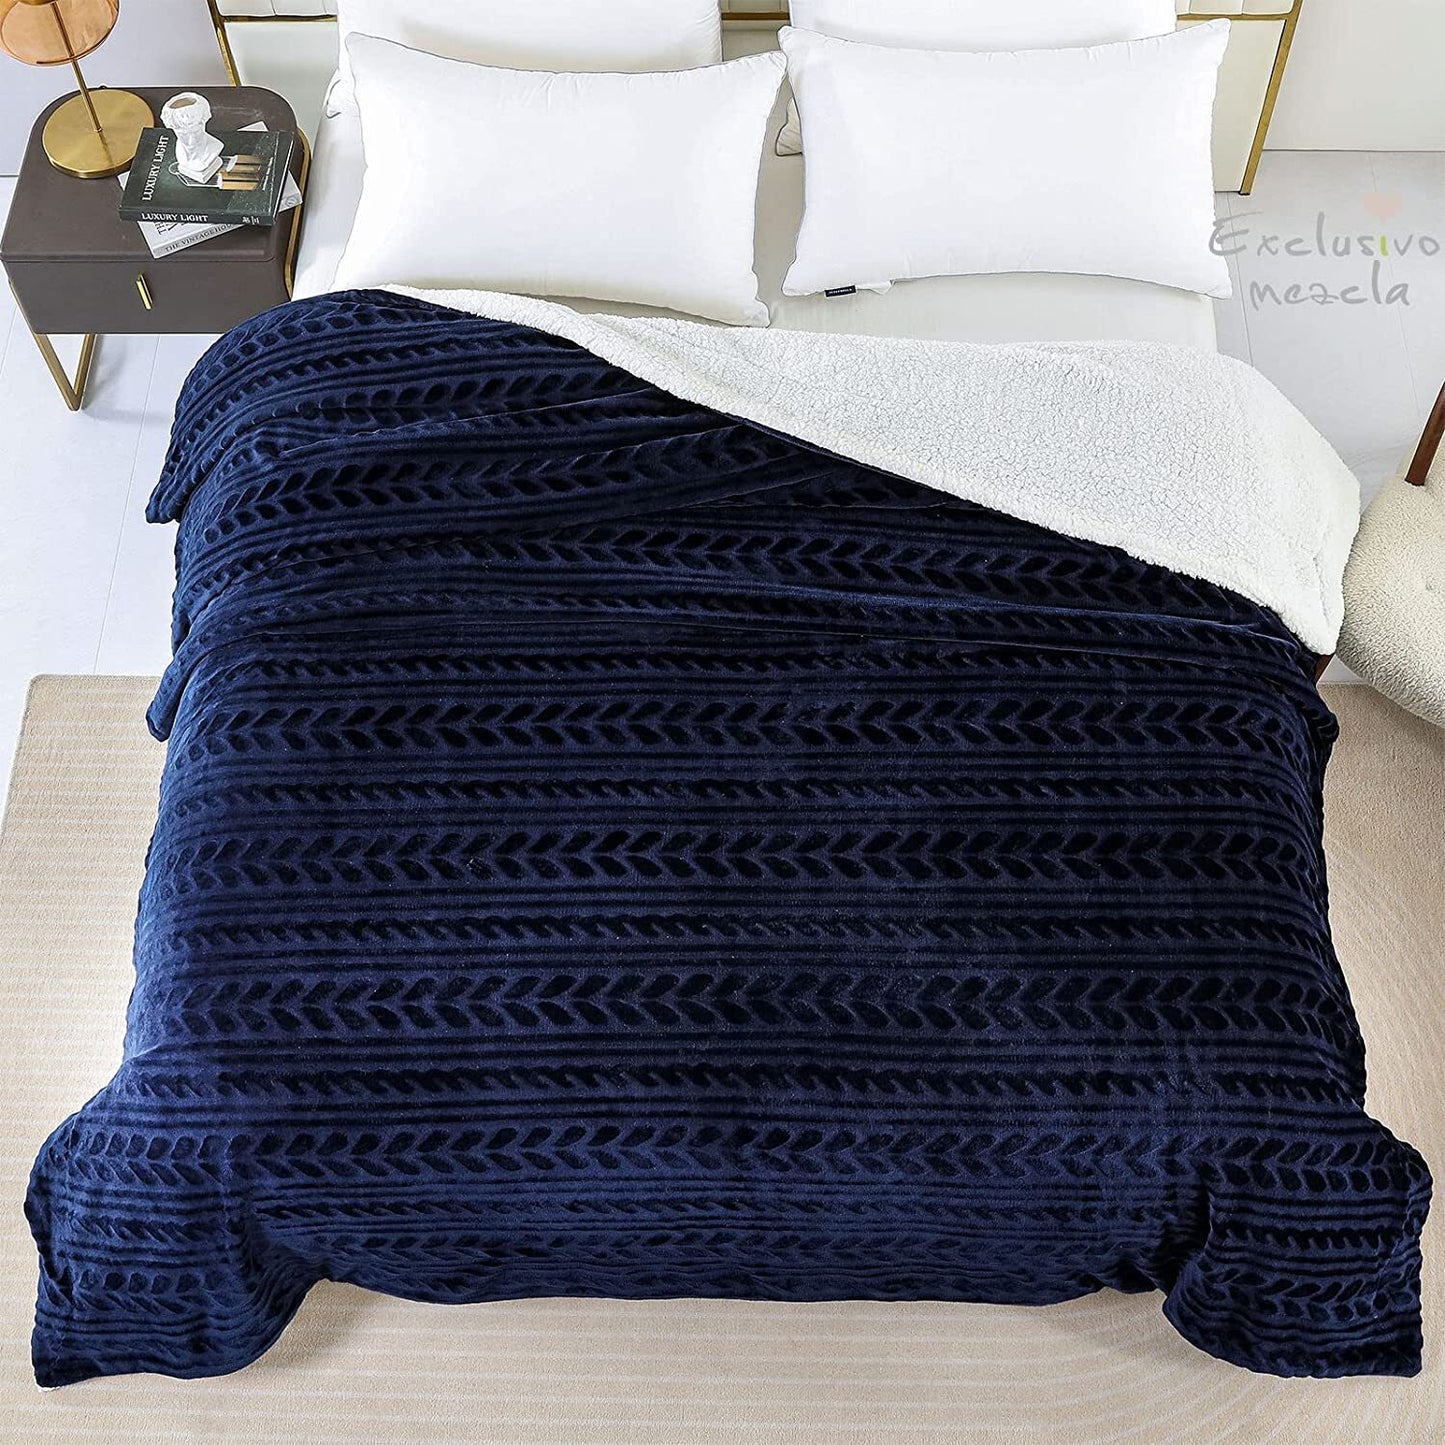 Exclusivo Mezcla Queen Size Sherpa Fleece Bed Blanket, Ultra Soft and Warm Reversible Velvet Blankets for Bed Couch Sofa 90x90 inches, Navy Blue